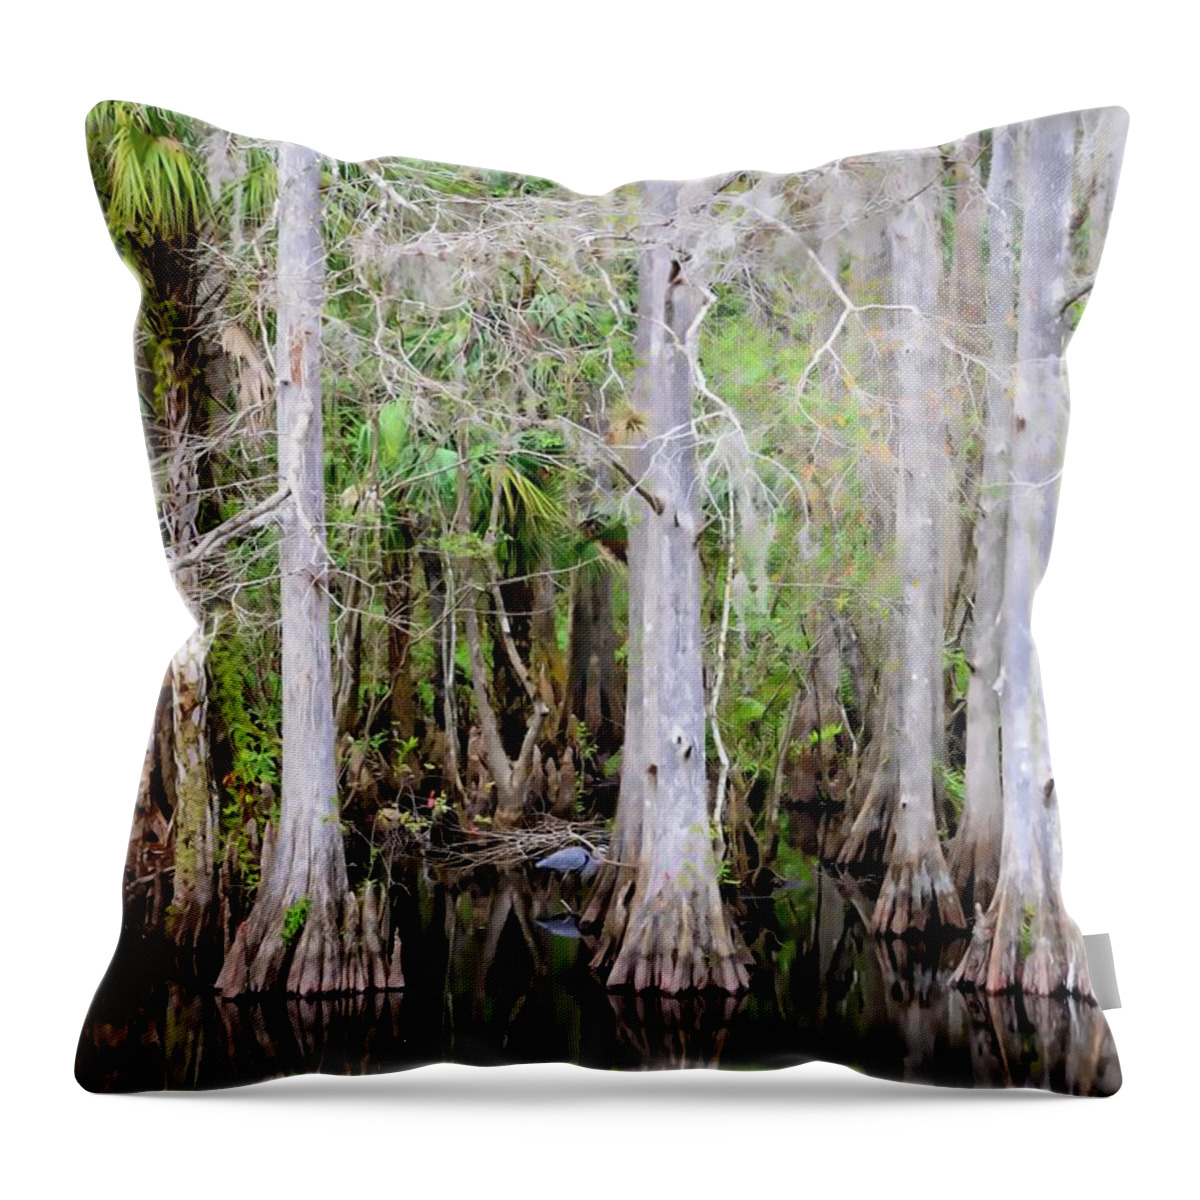 Conservation Land Throw Pillow featuring the photograph Conservation Land by Alison Belsan Horton